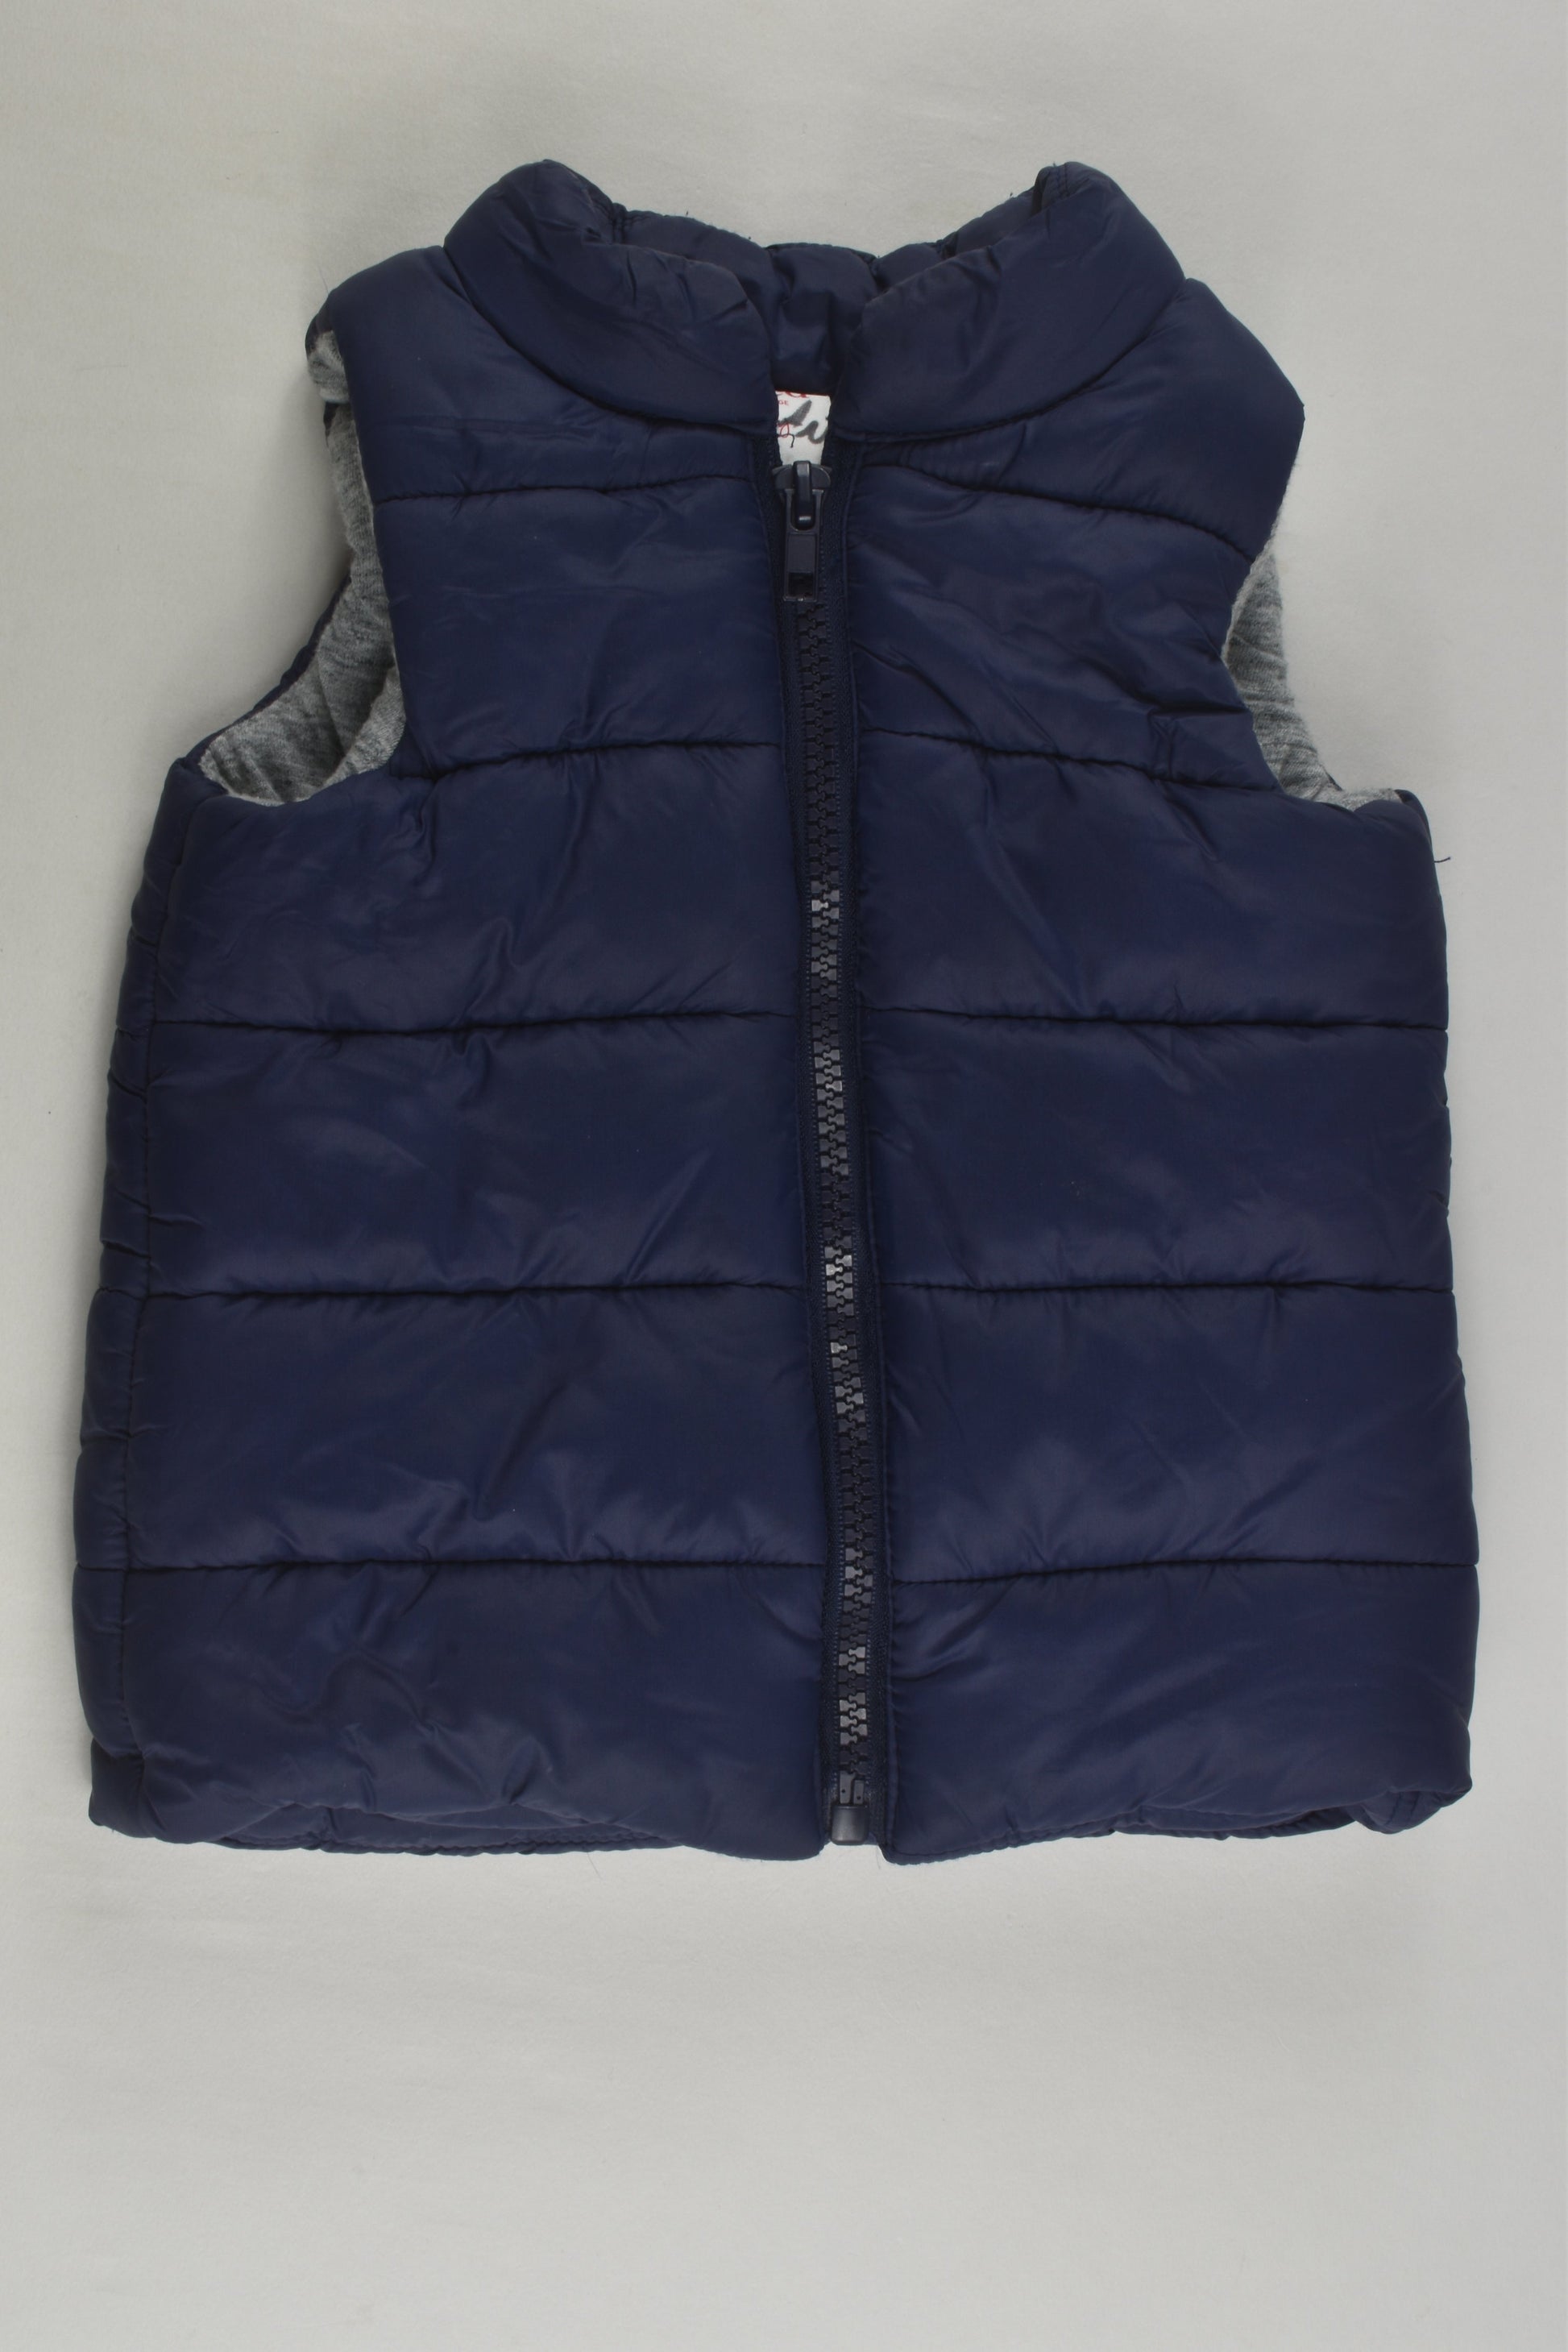 Seed Heritage Size M (6-12 months) Puffer Vest